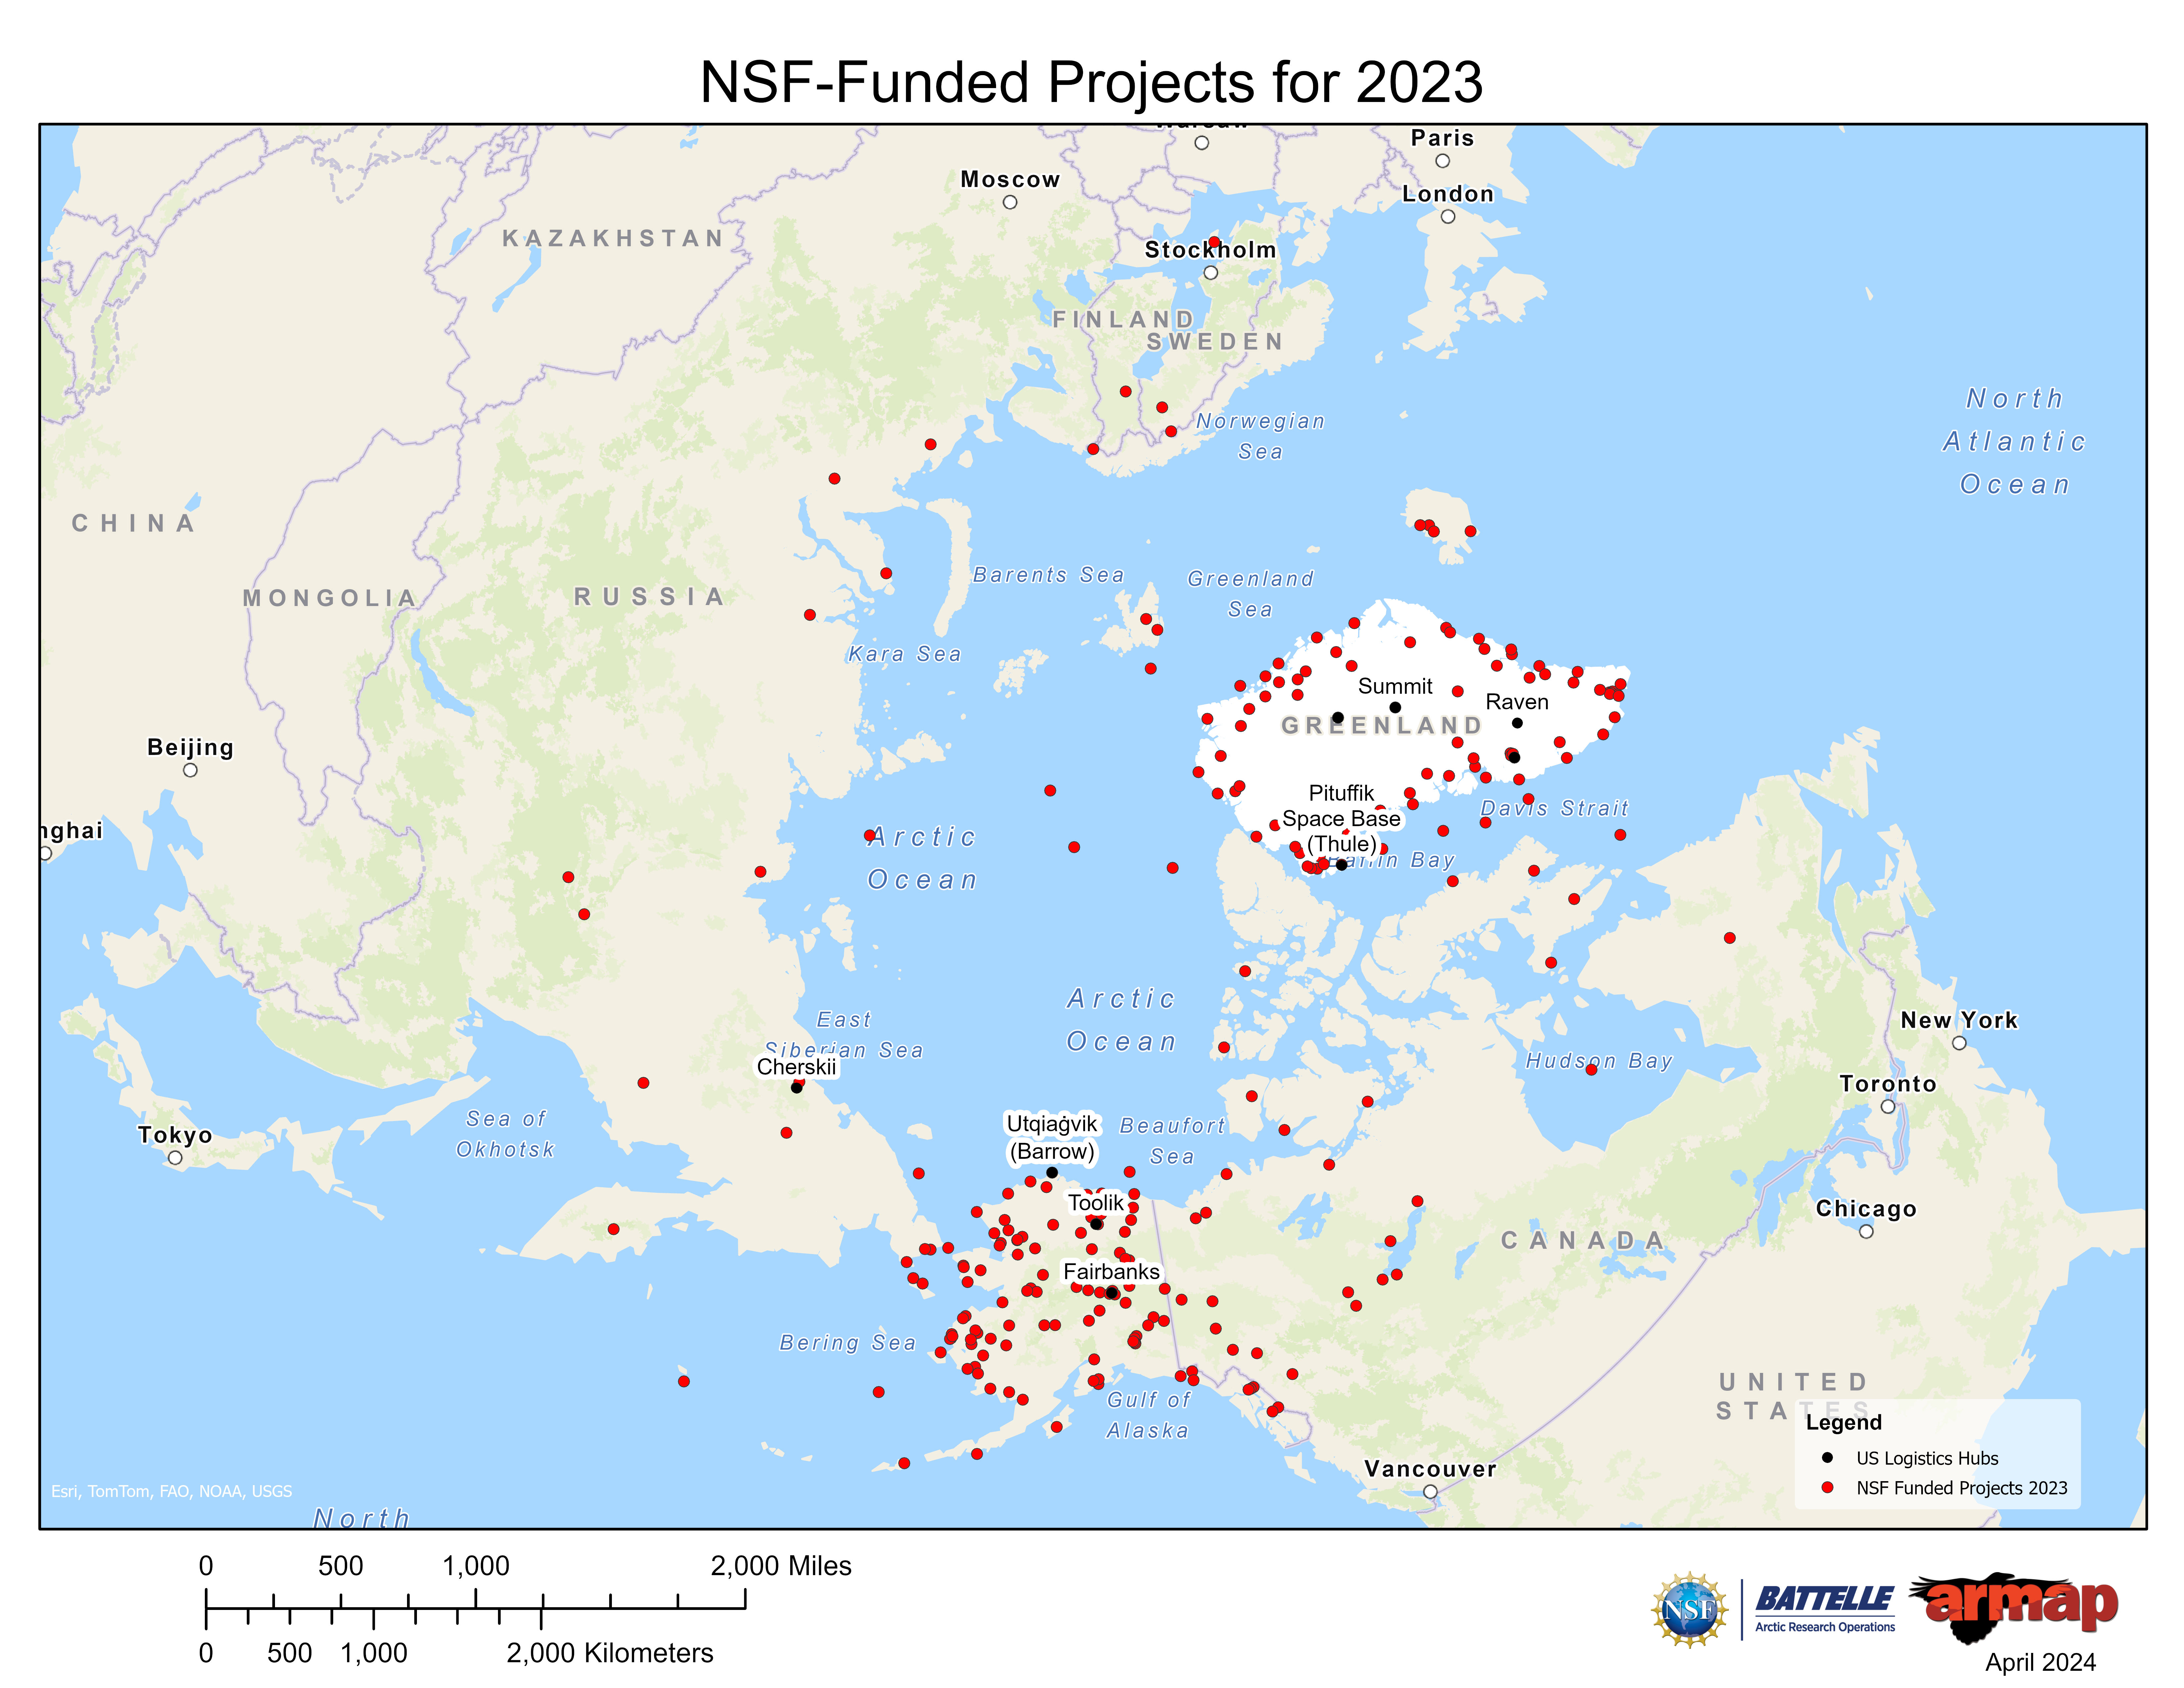 NSF-Funded Projects for the Past Year